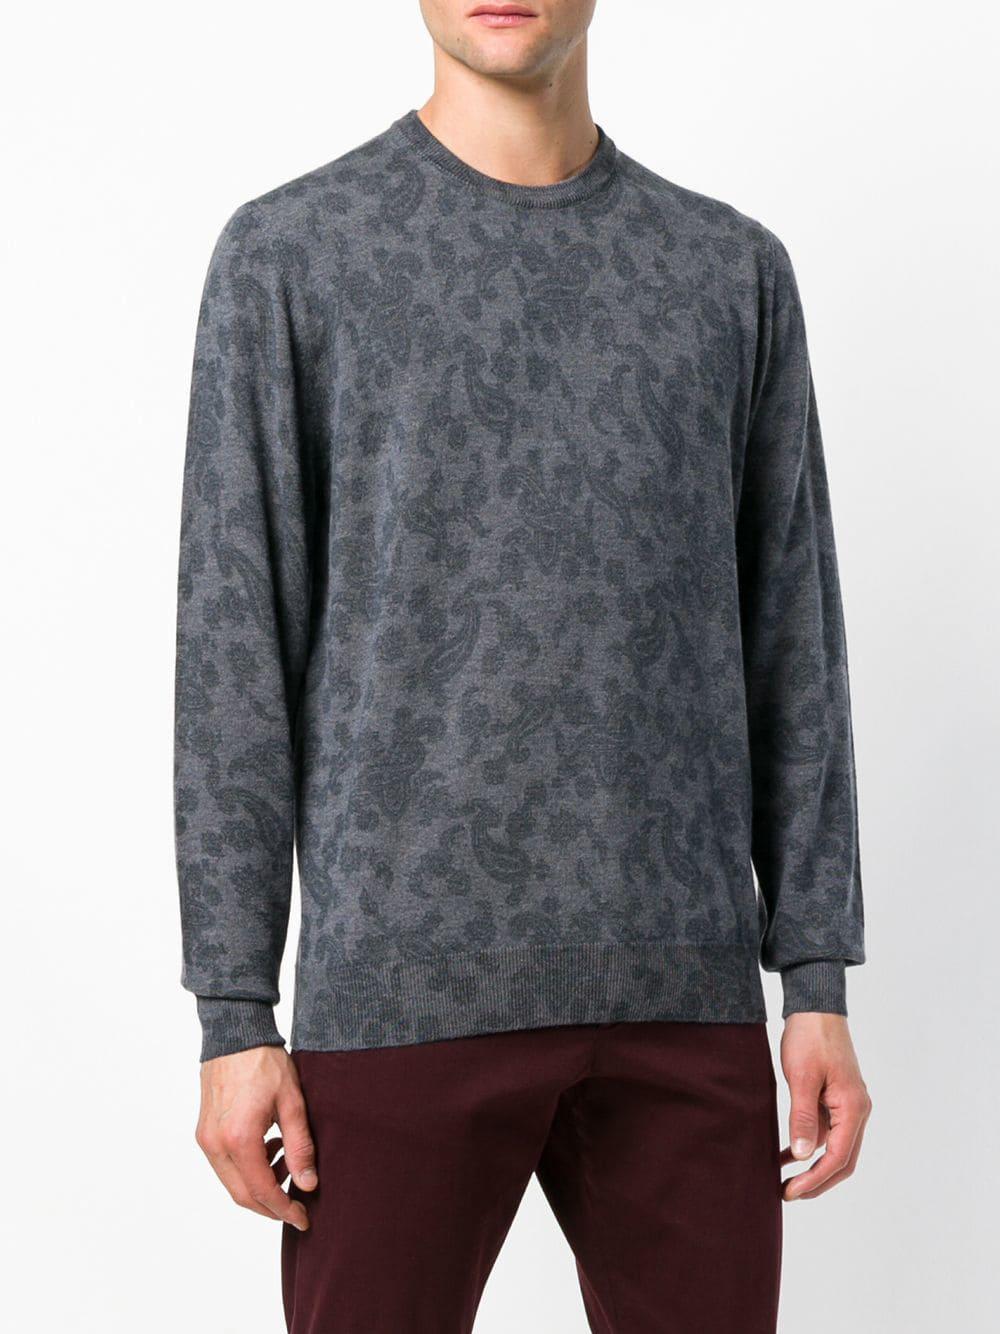 Etro Wool Paisley Print Knitted Sweater in Grey (Gray) for Men - Lyst